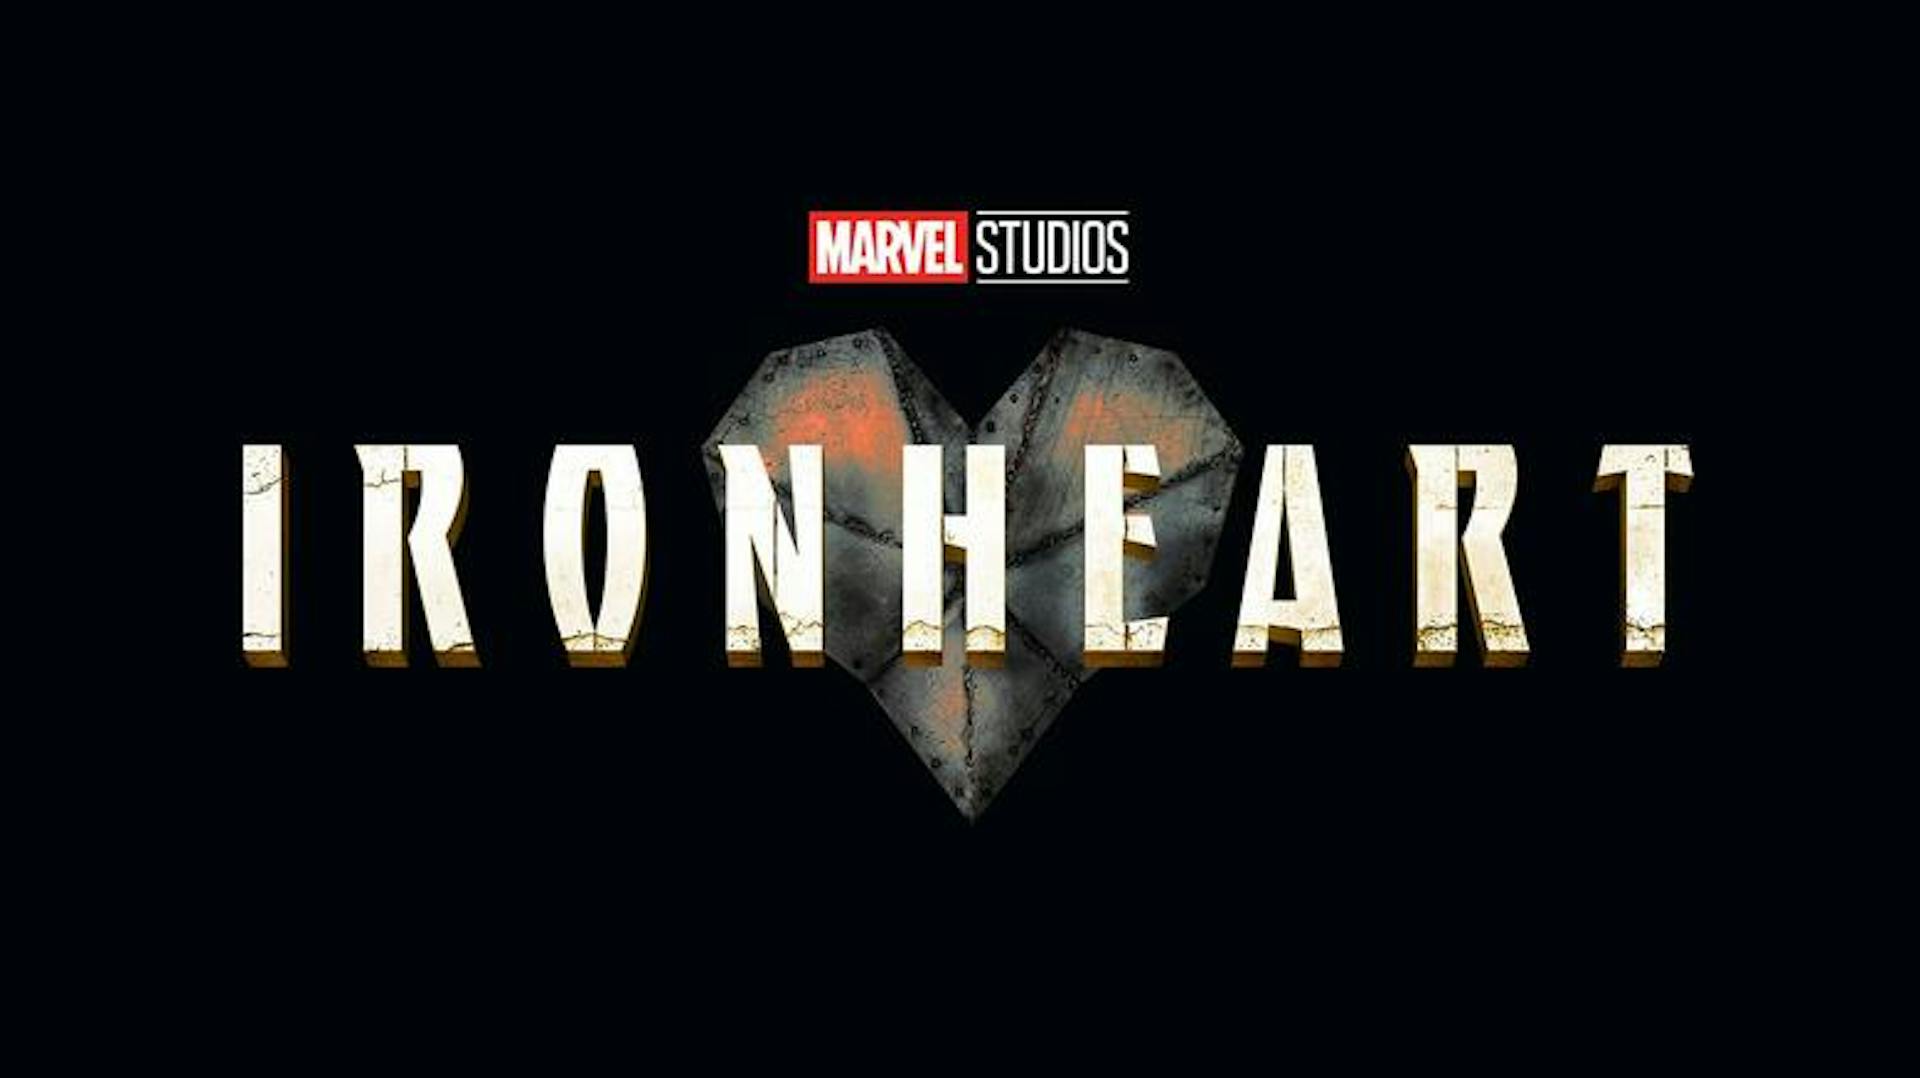 https://www.marvel.com/articles/tv-shows/sdcc-2022-marvel-studios-ironheart-release-date-announced